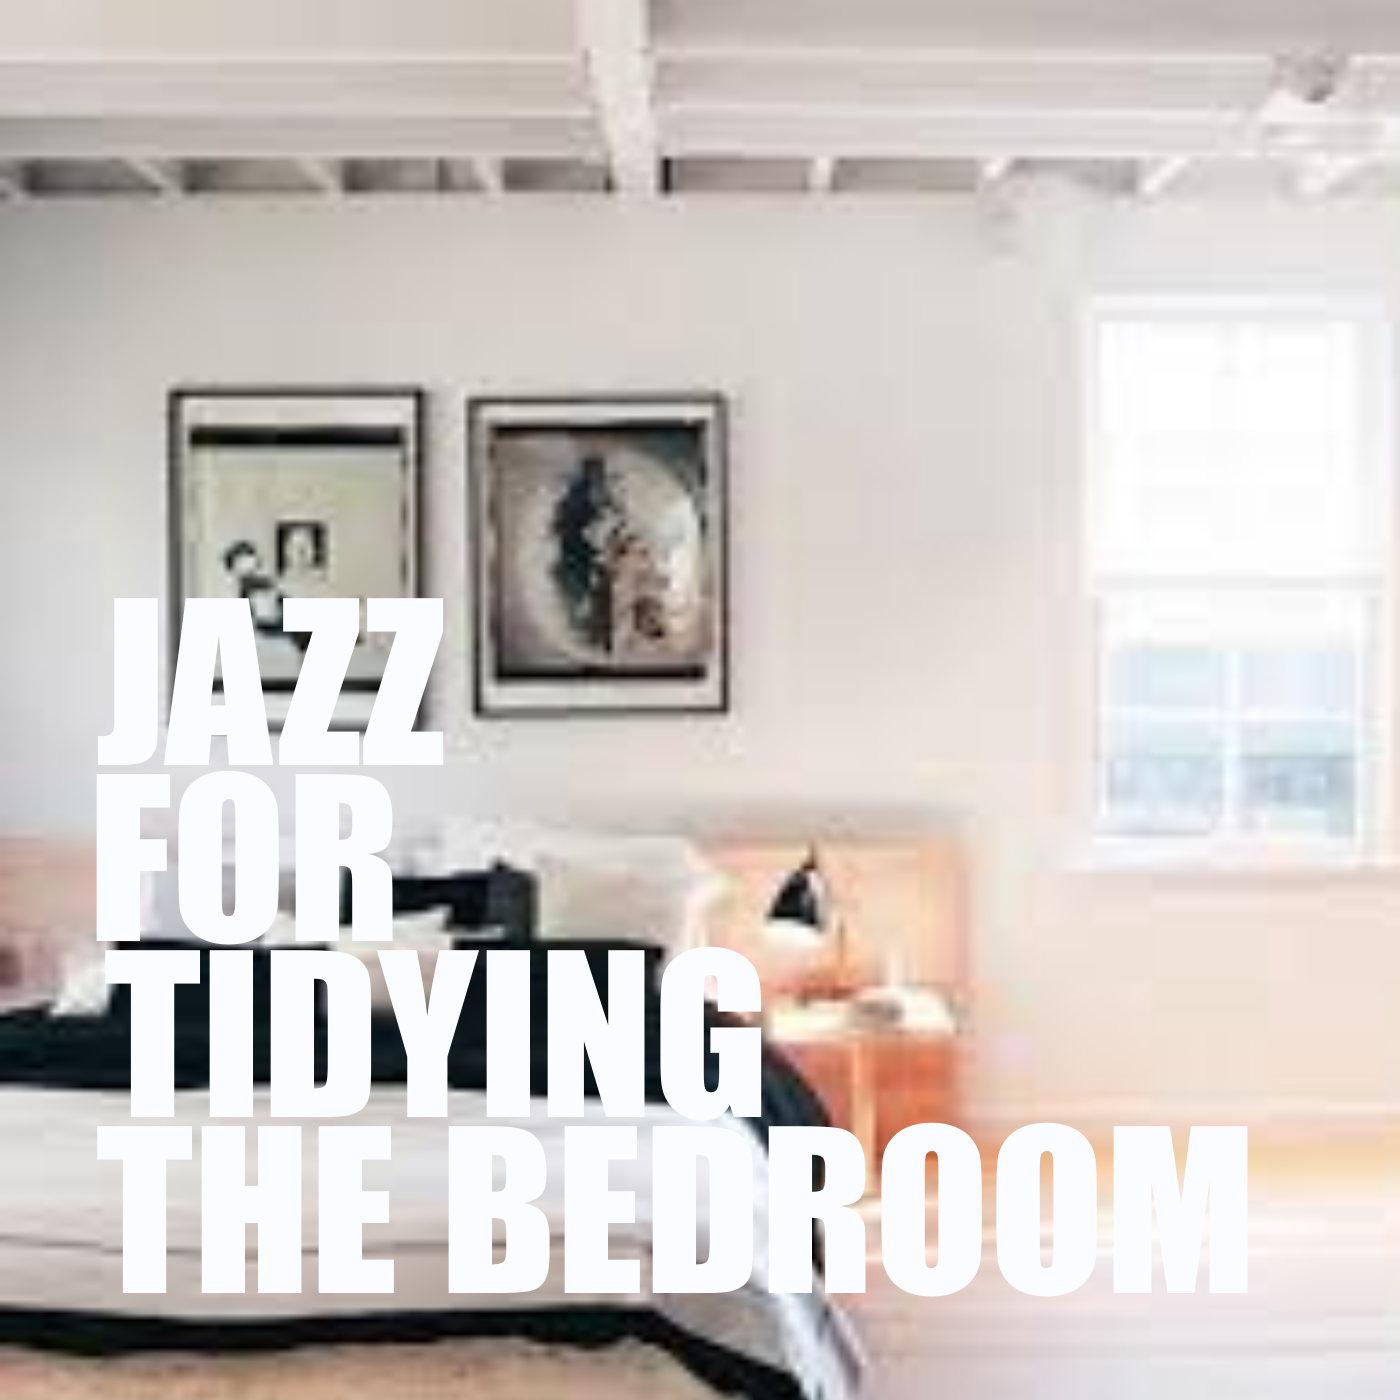 Jazz For Tidying The Bedroom